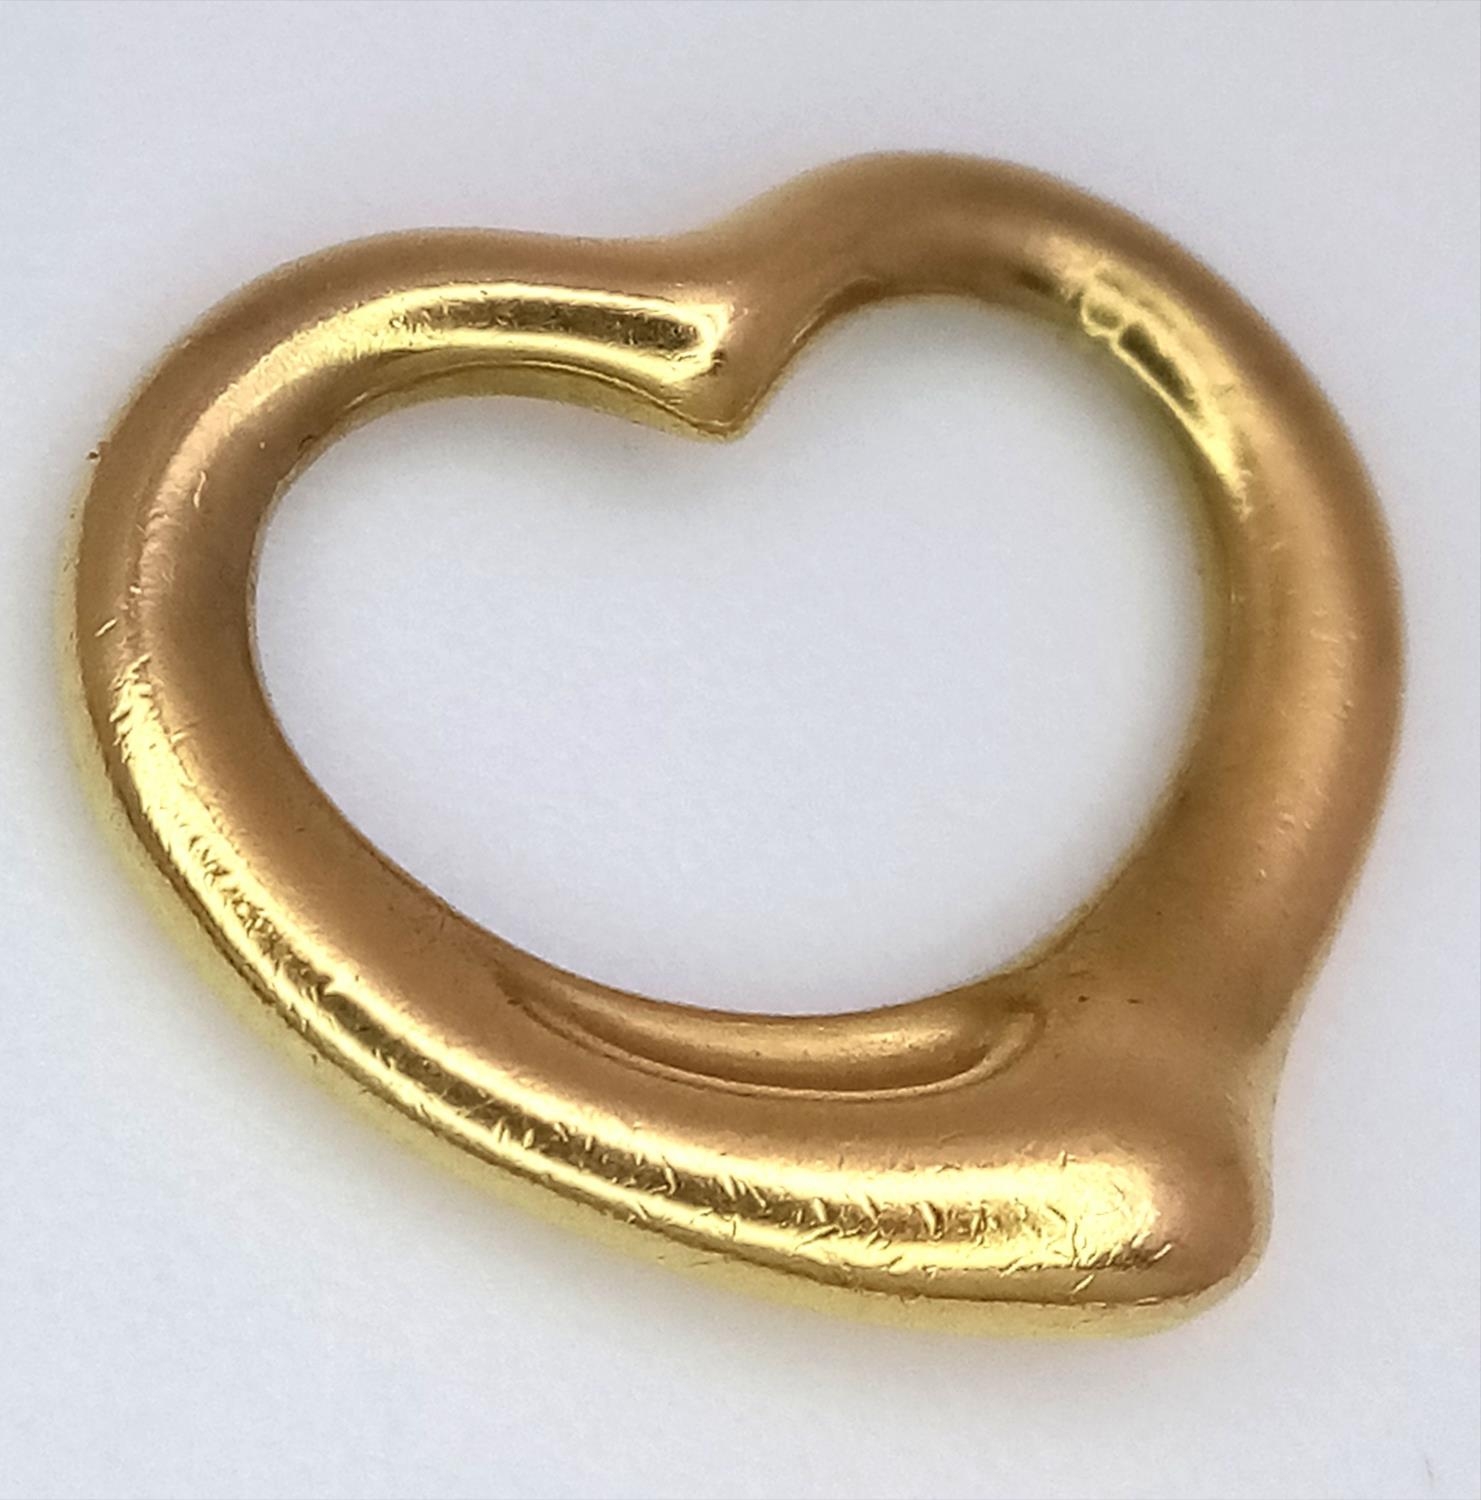 A Tiffany and Co. 18K Yellow Gold Heart Pendant. Tiffany markings. 15 x 15mm. 2g - Image 2 of 5